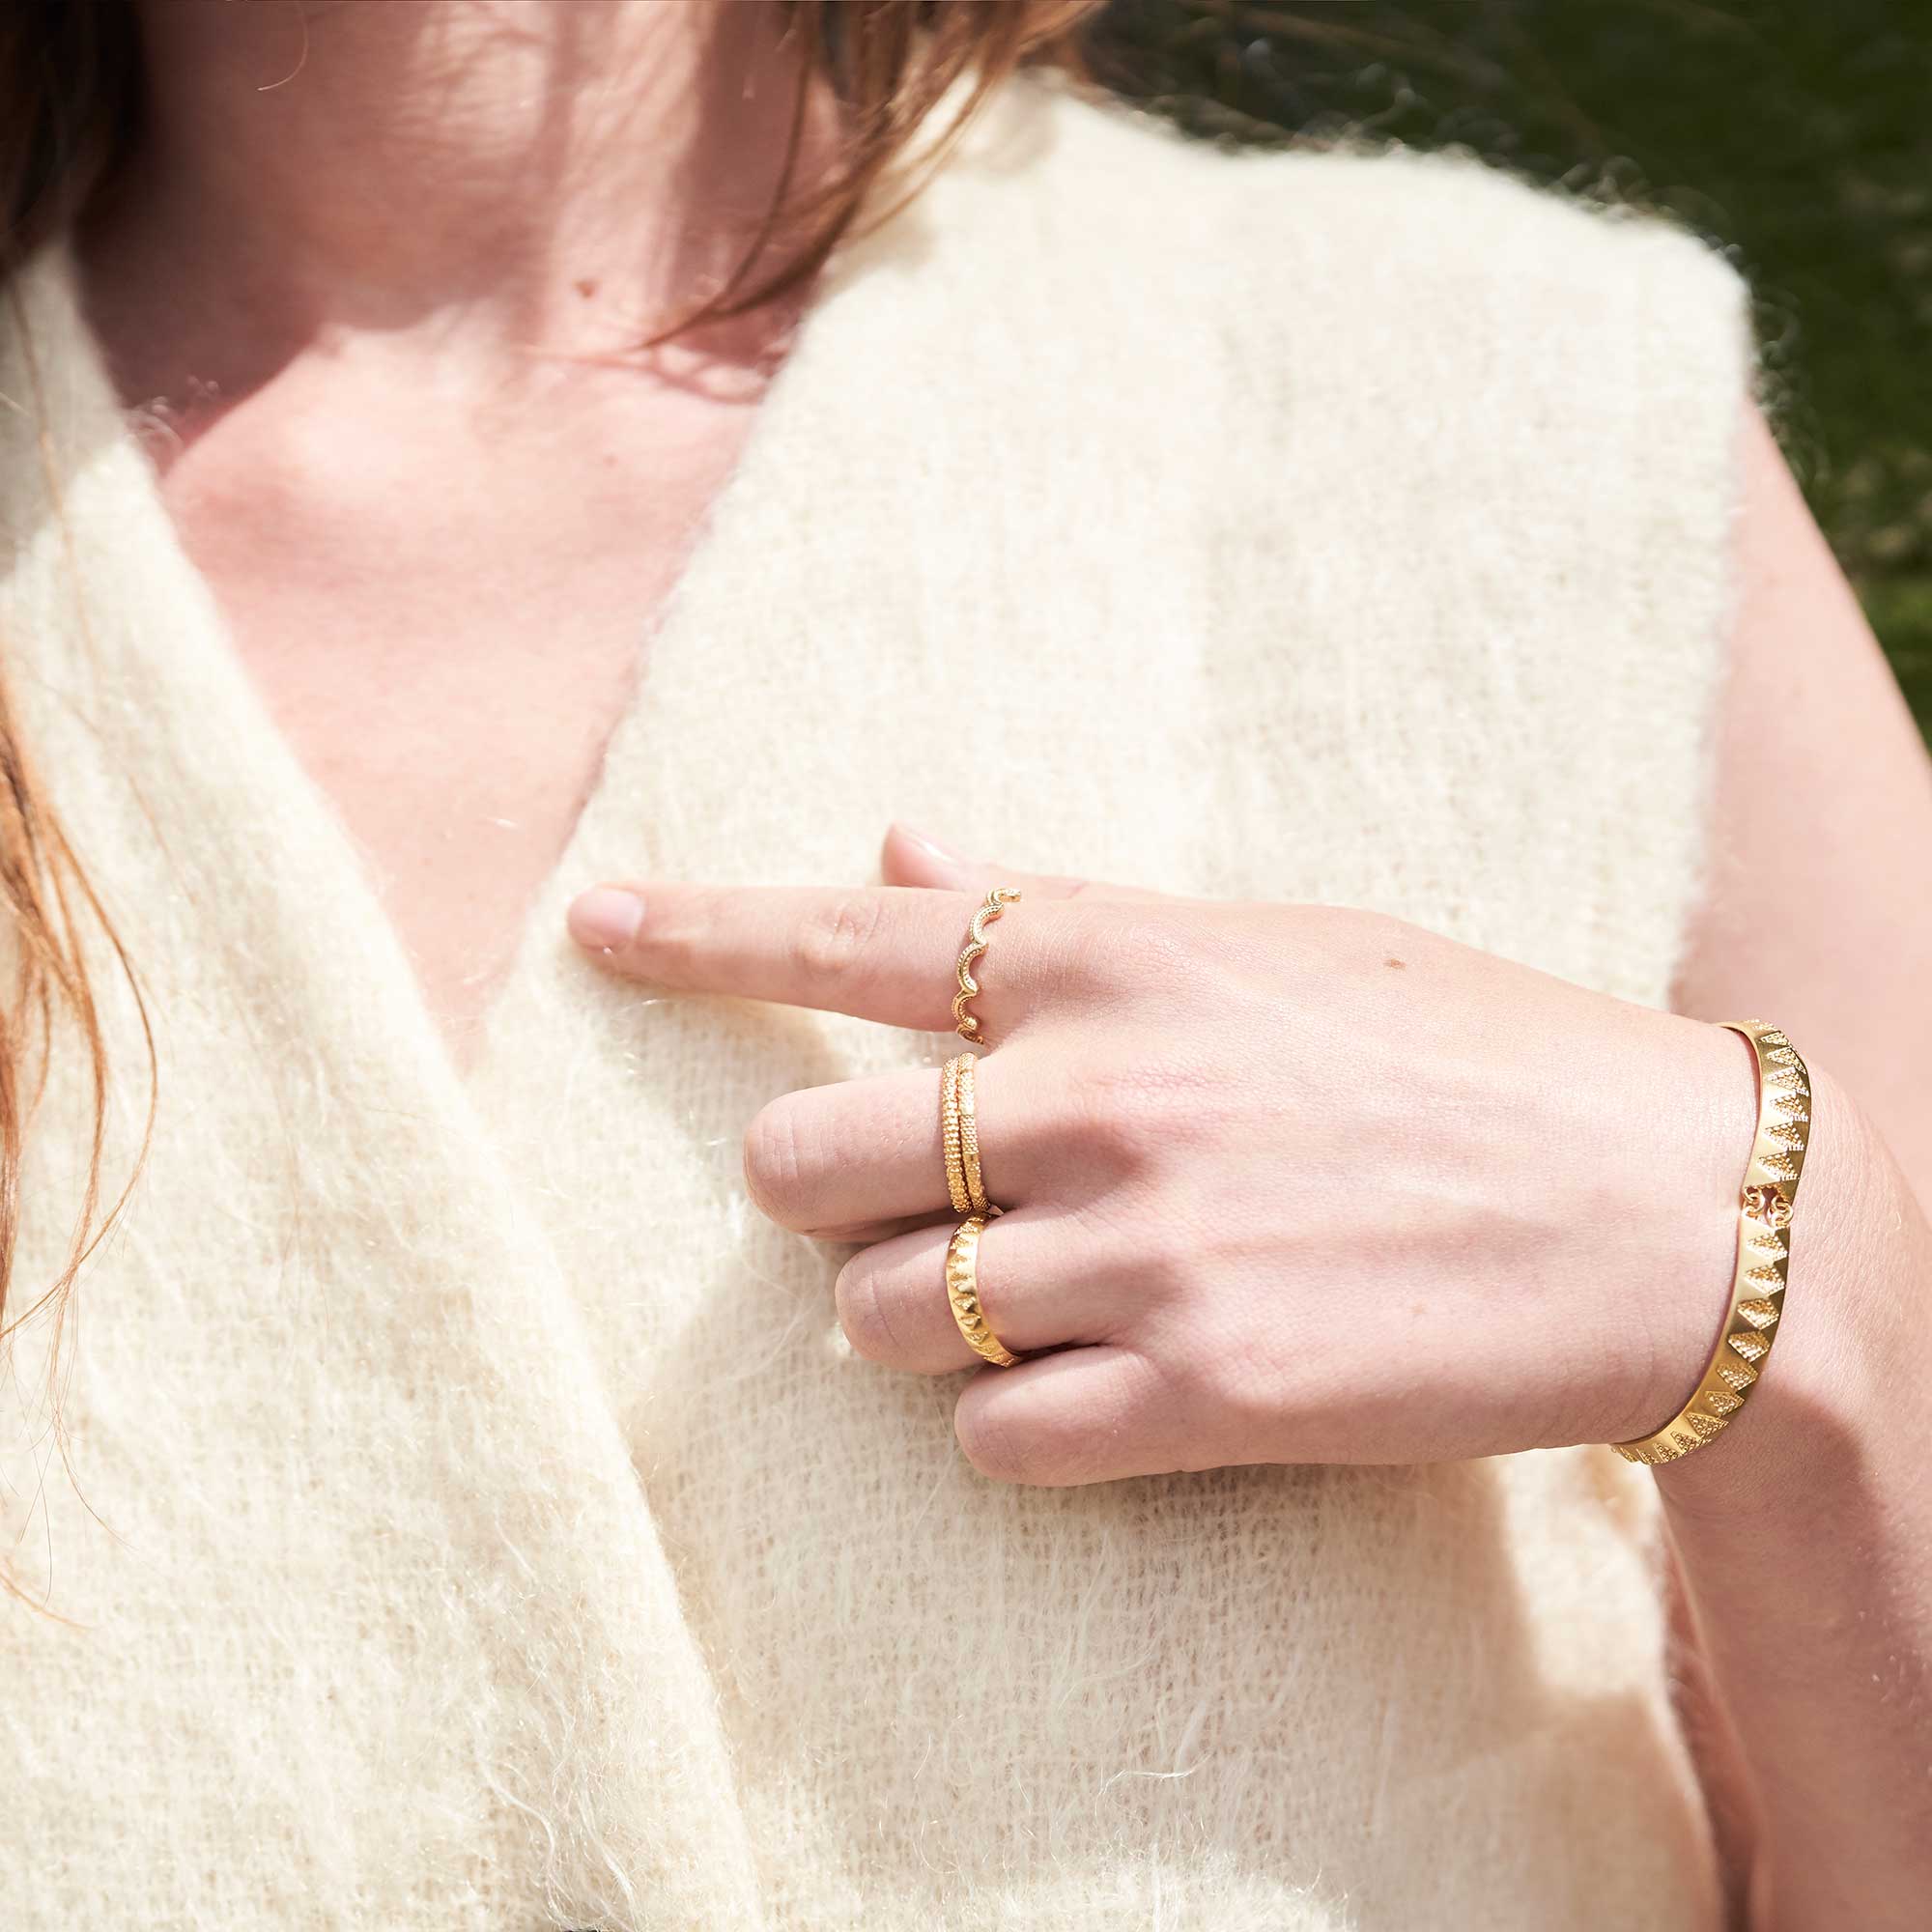 A model in a white wool top wearing gold rings and bracelet